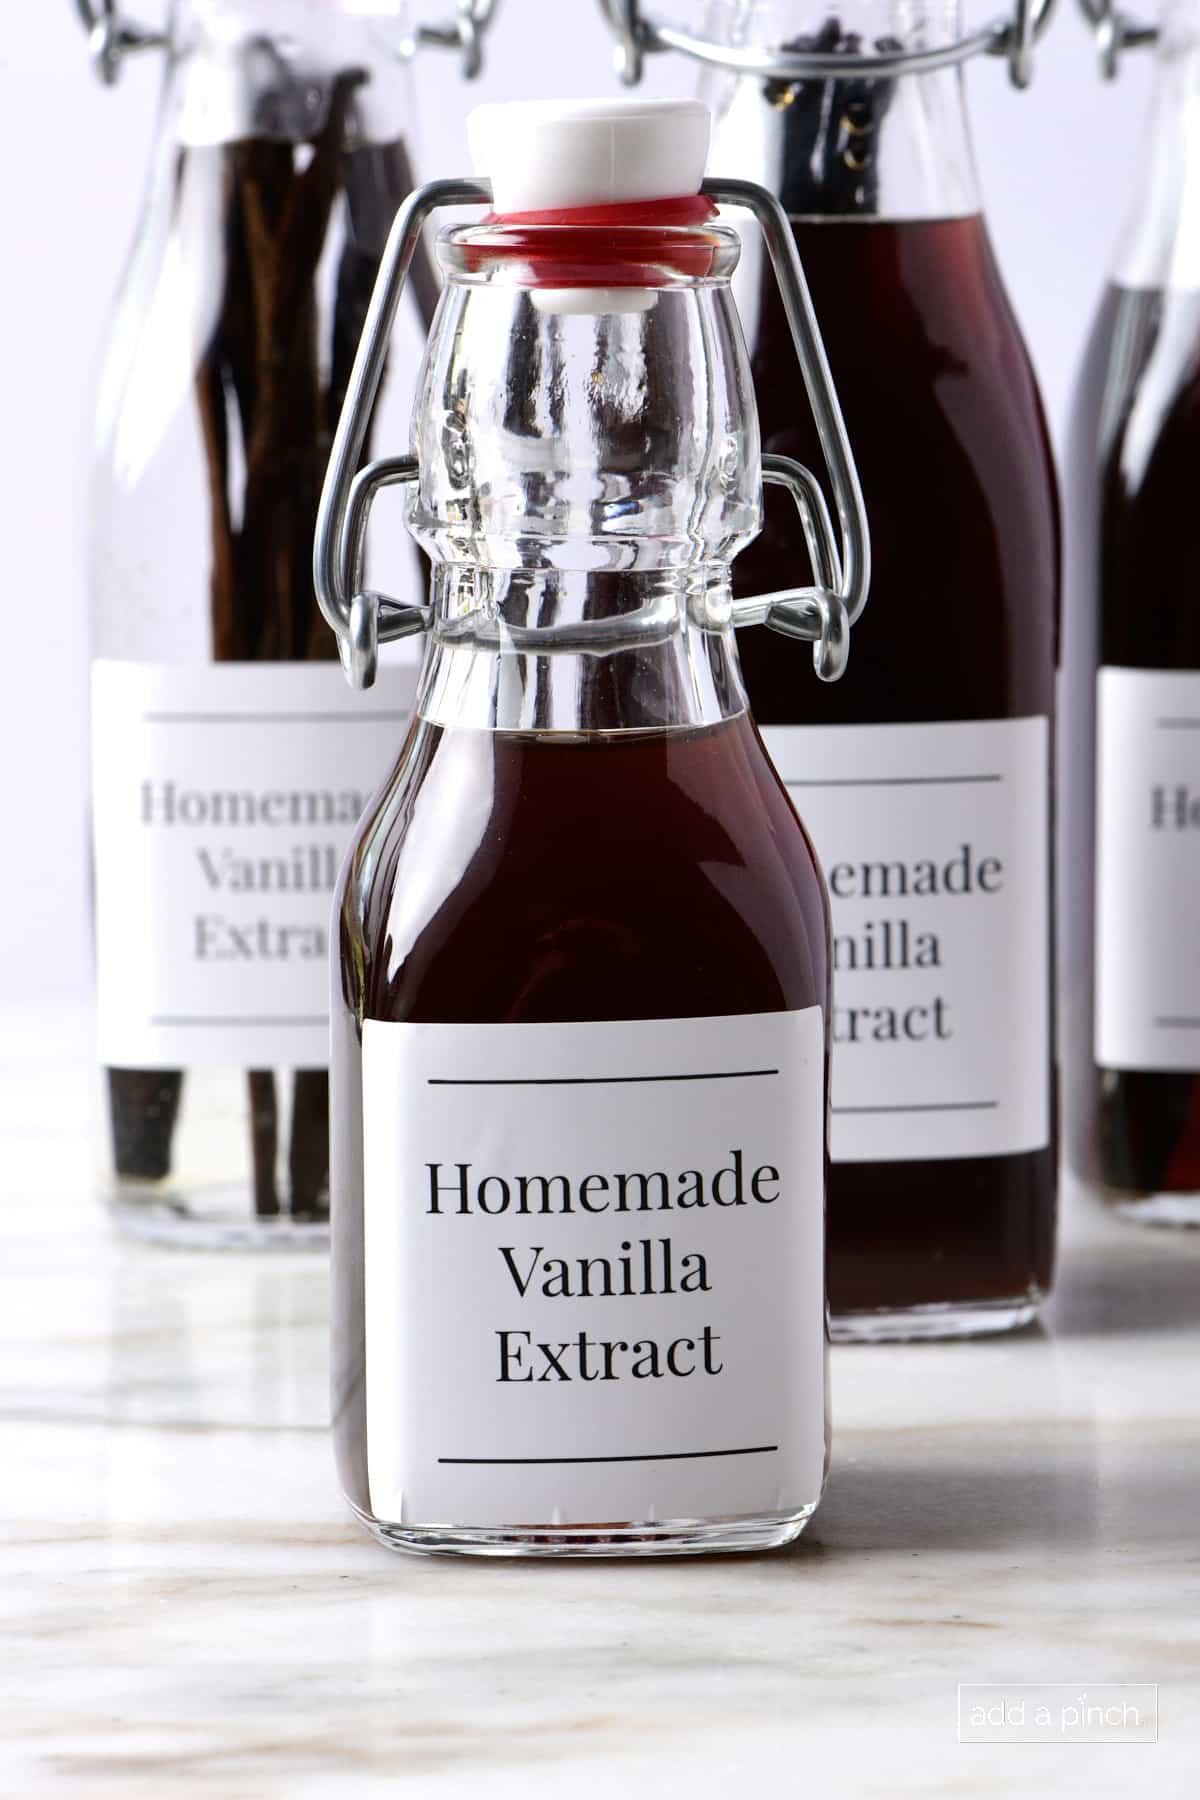 Bottles of homemade vanilla extract on a marble surface.